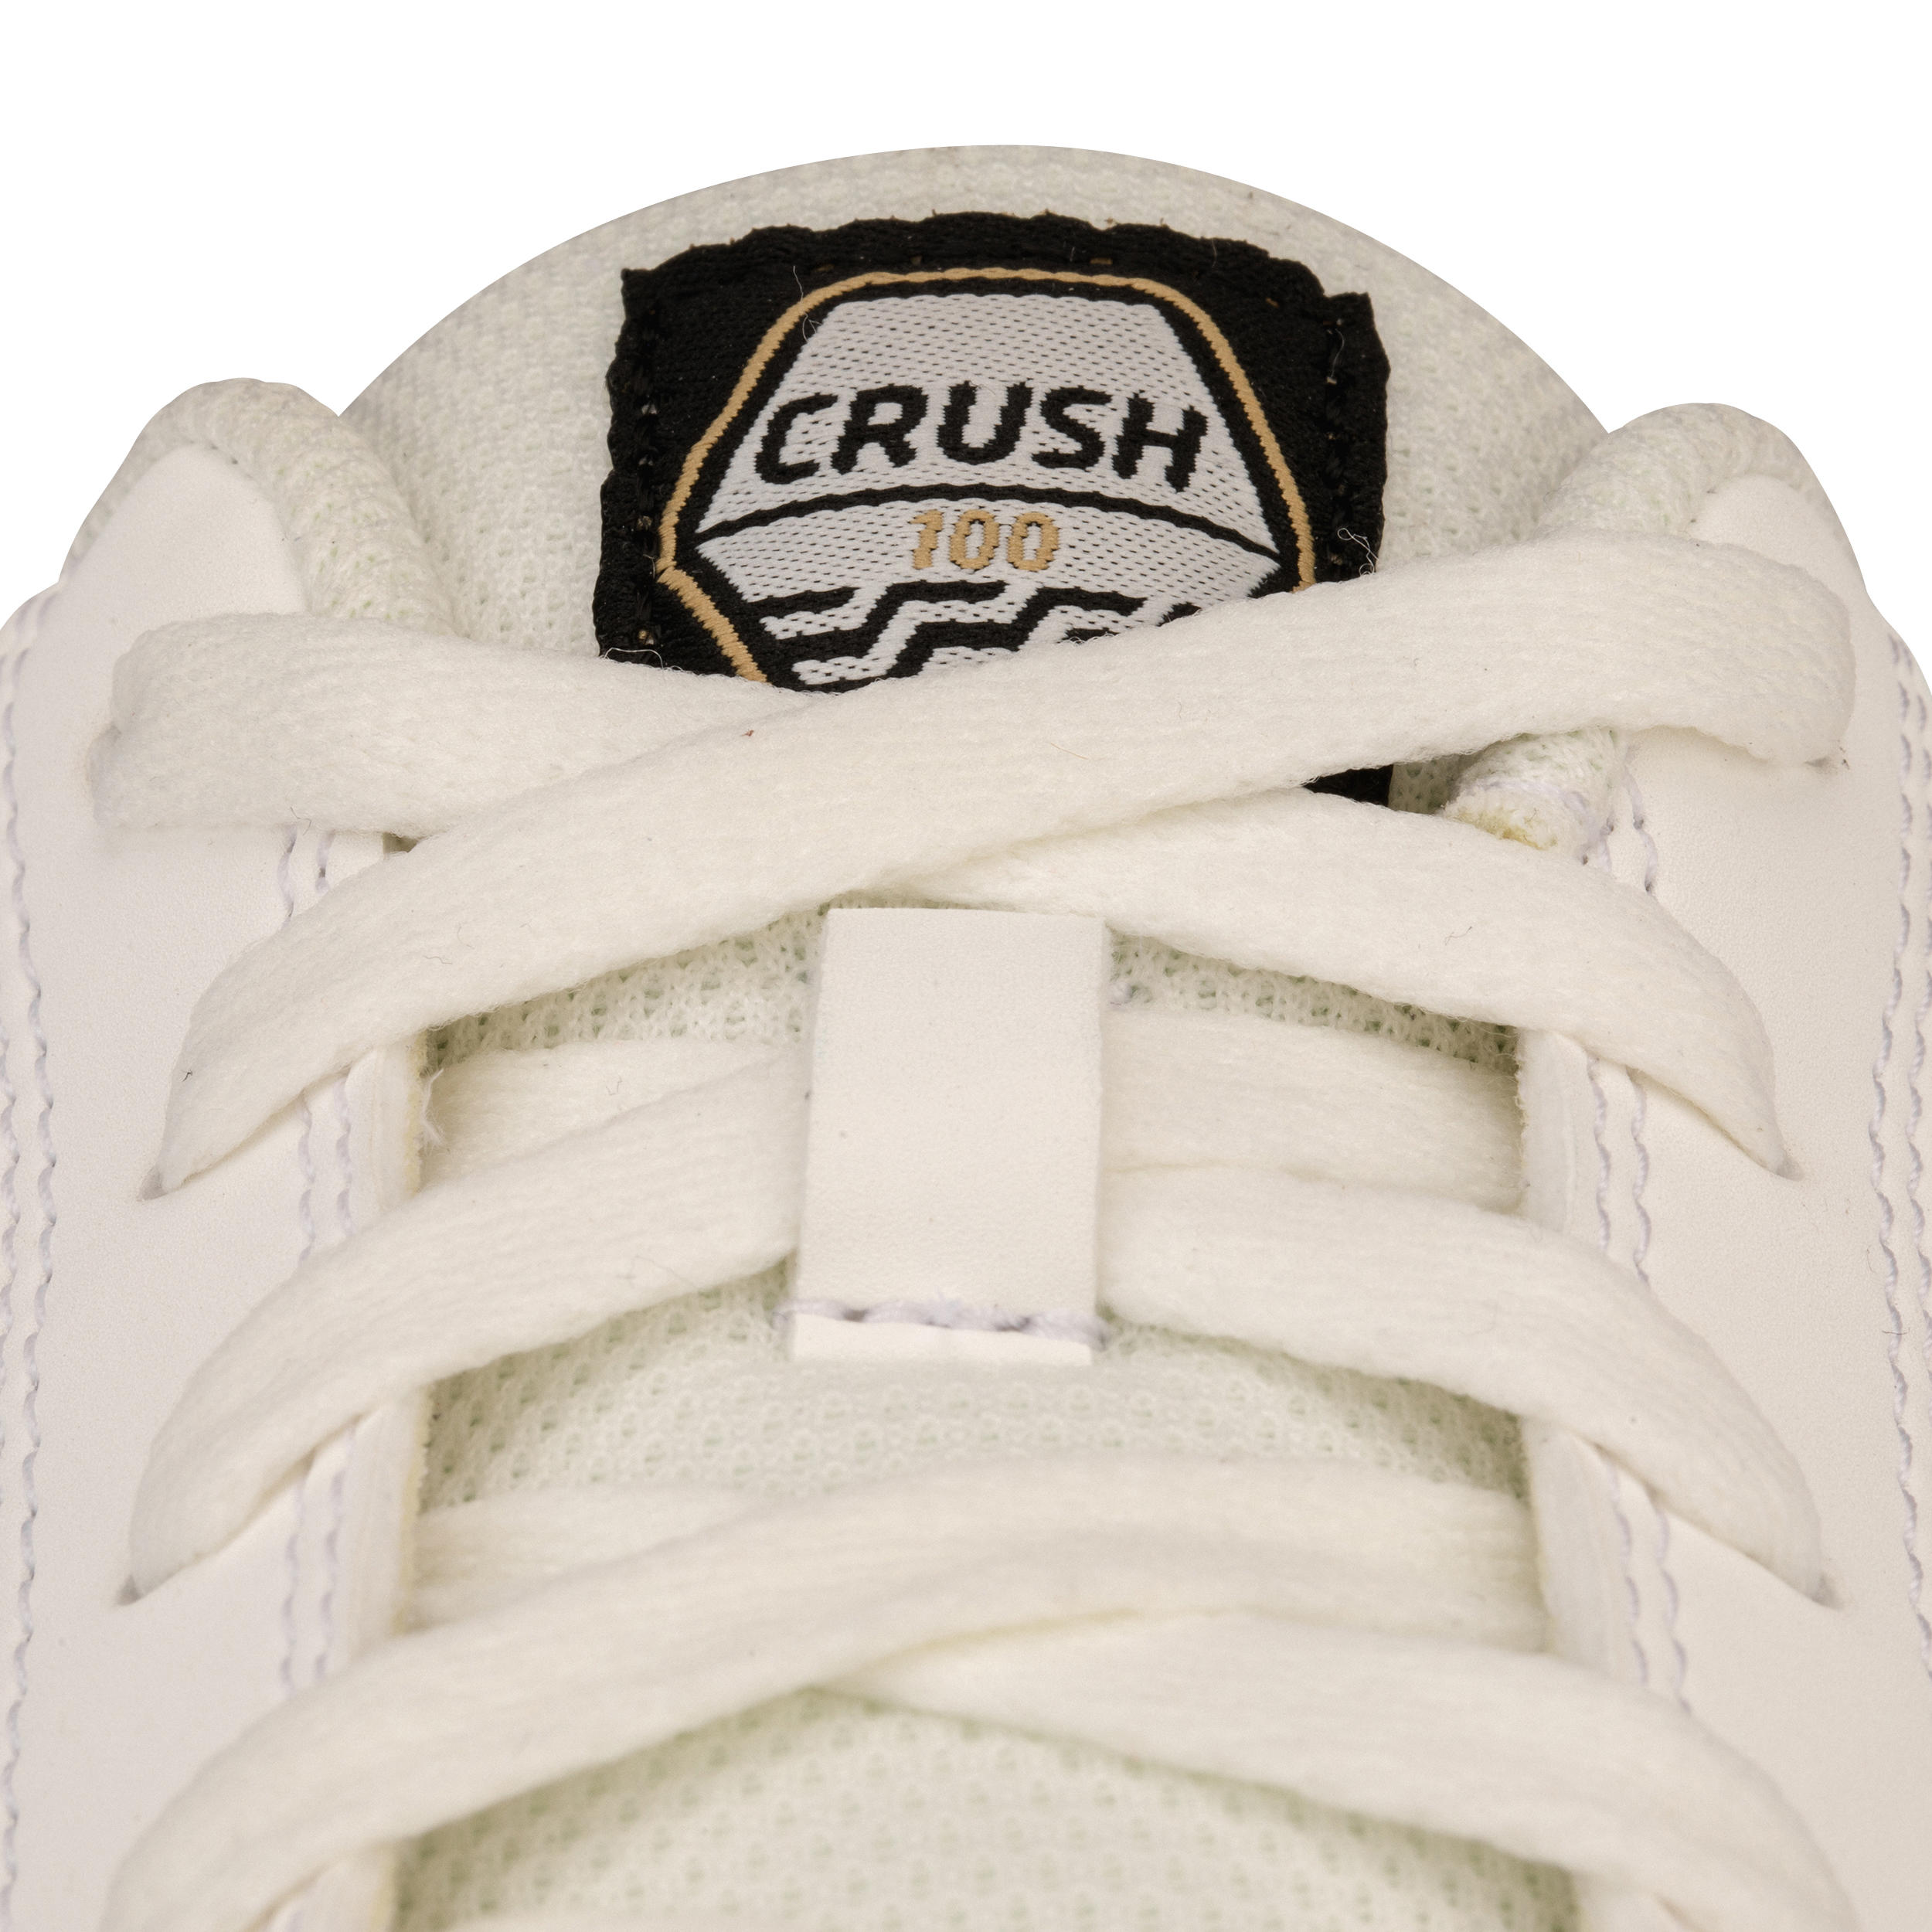 Crush 100 Kids' Skate Shoes - White and Rubber 10/11